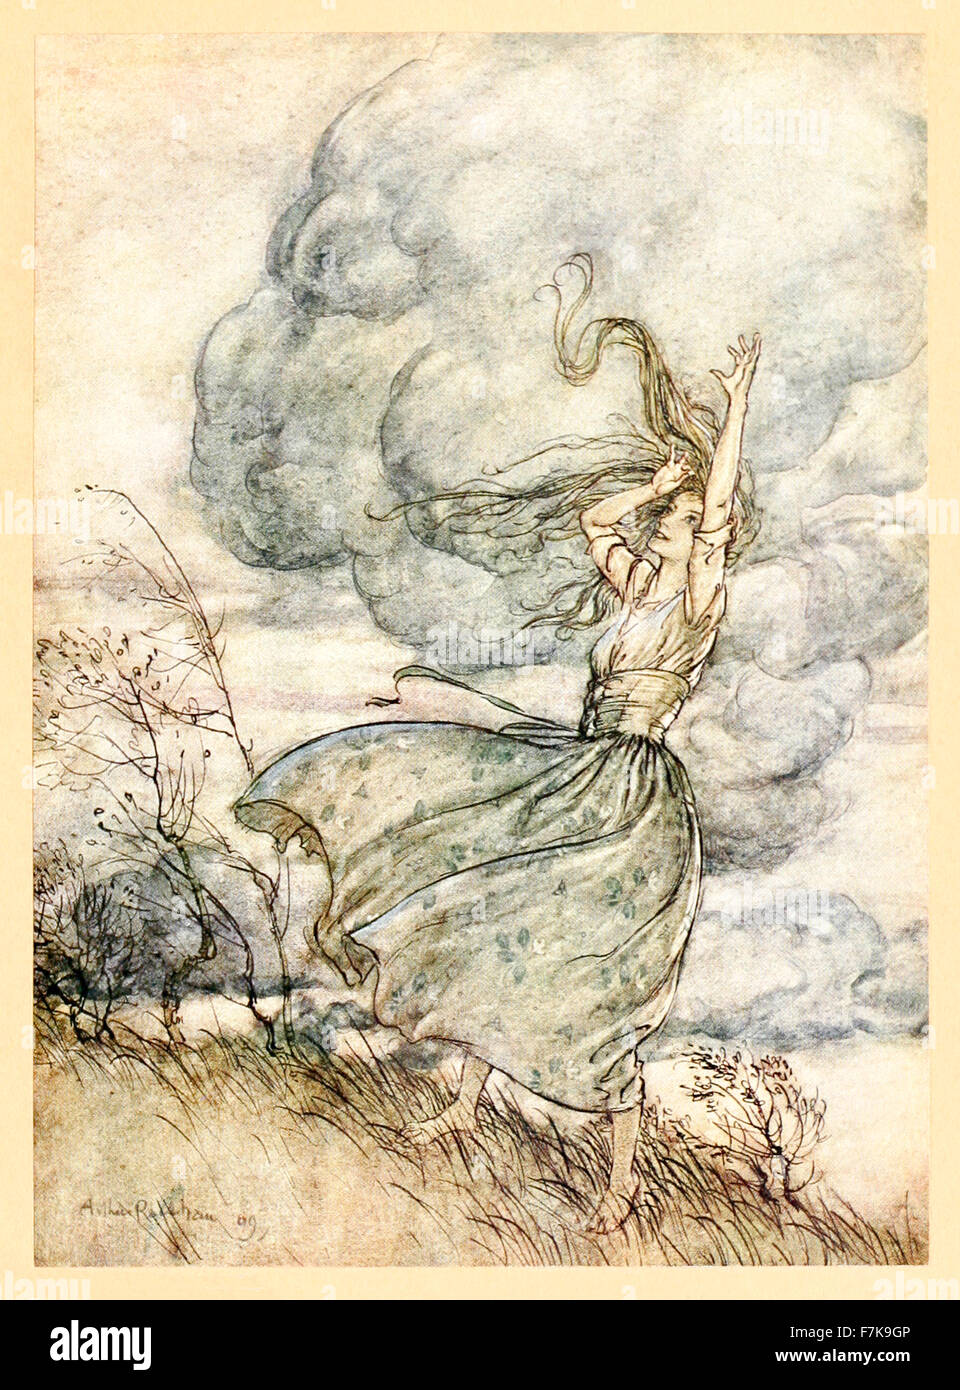 'When the storm threatened to burst on their heads, she uttered a laughing reproof to the clouds. 'Come, come,' saith she, 'look to it that you wet us not'' from ‘Undine’ illustrated by Arthur Rackham (1867-1939). See description for more information. Stock Photo